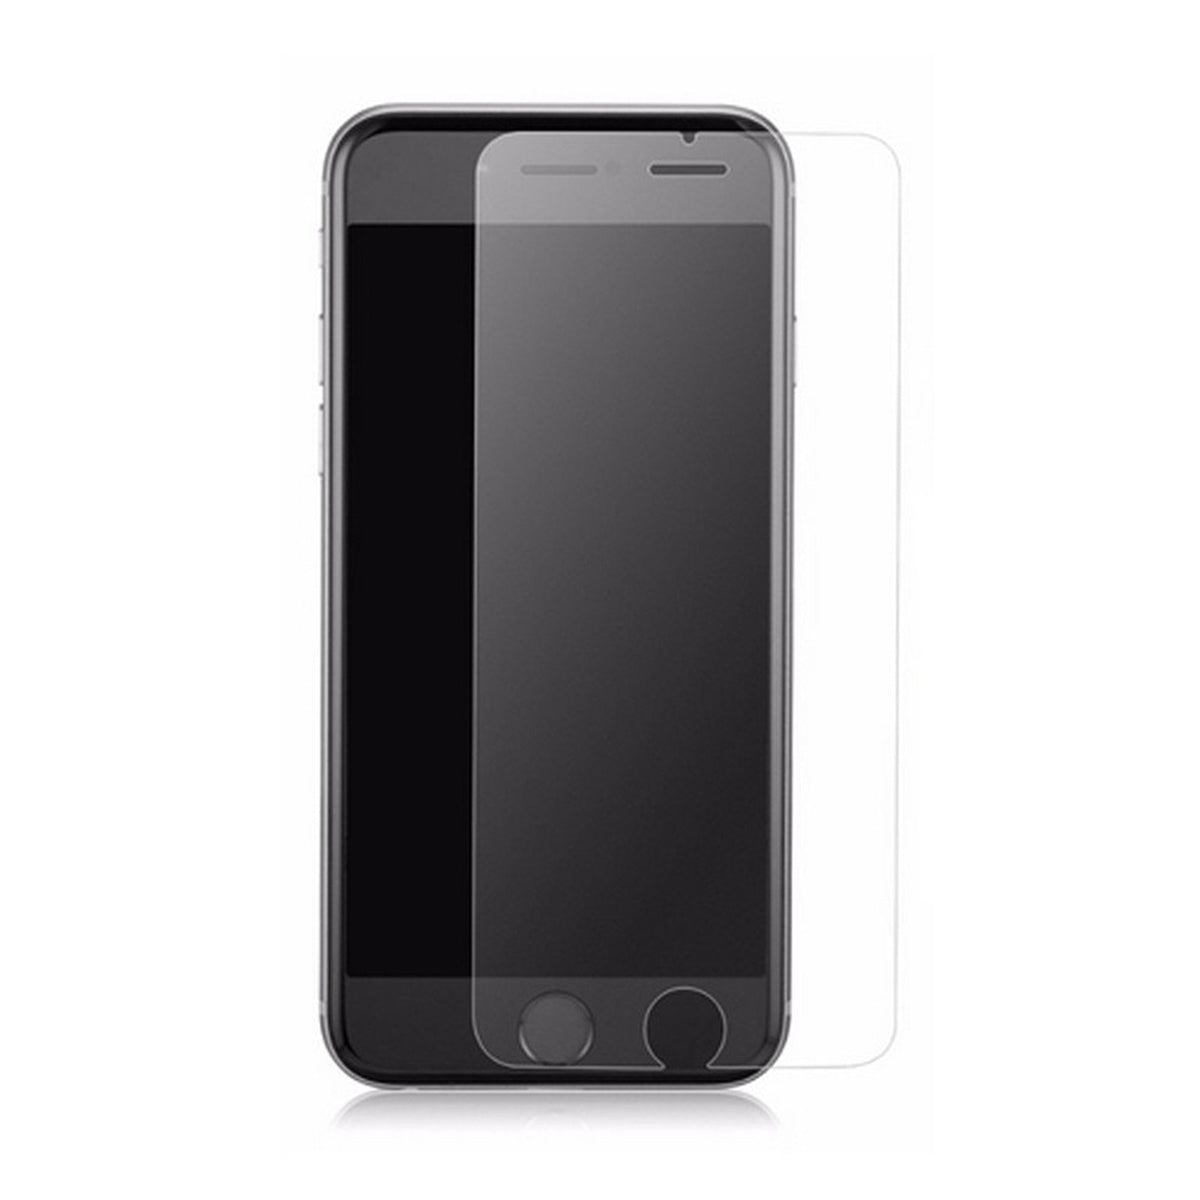 iPhone 6/6S/7/8 Screen Protector